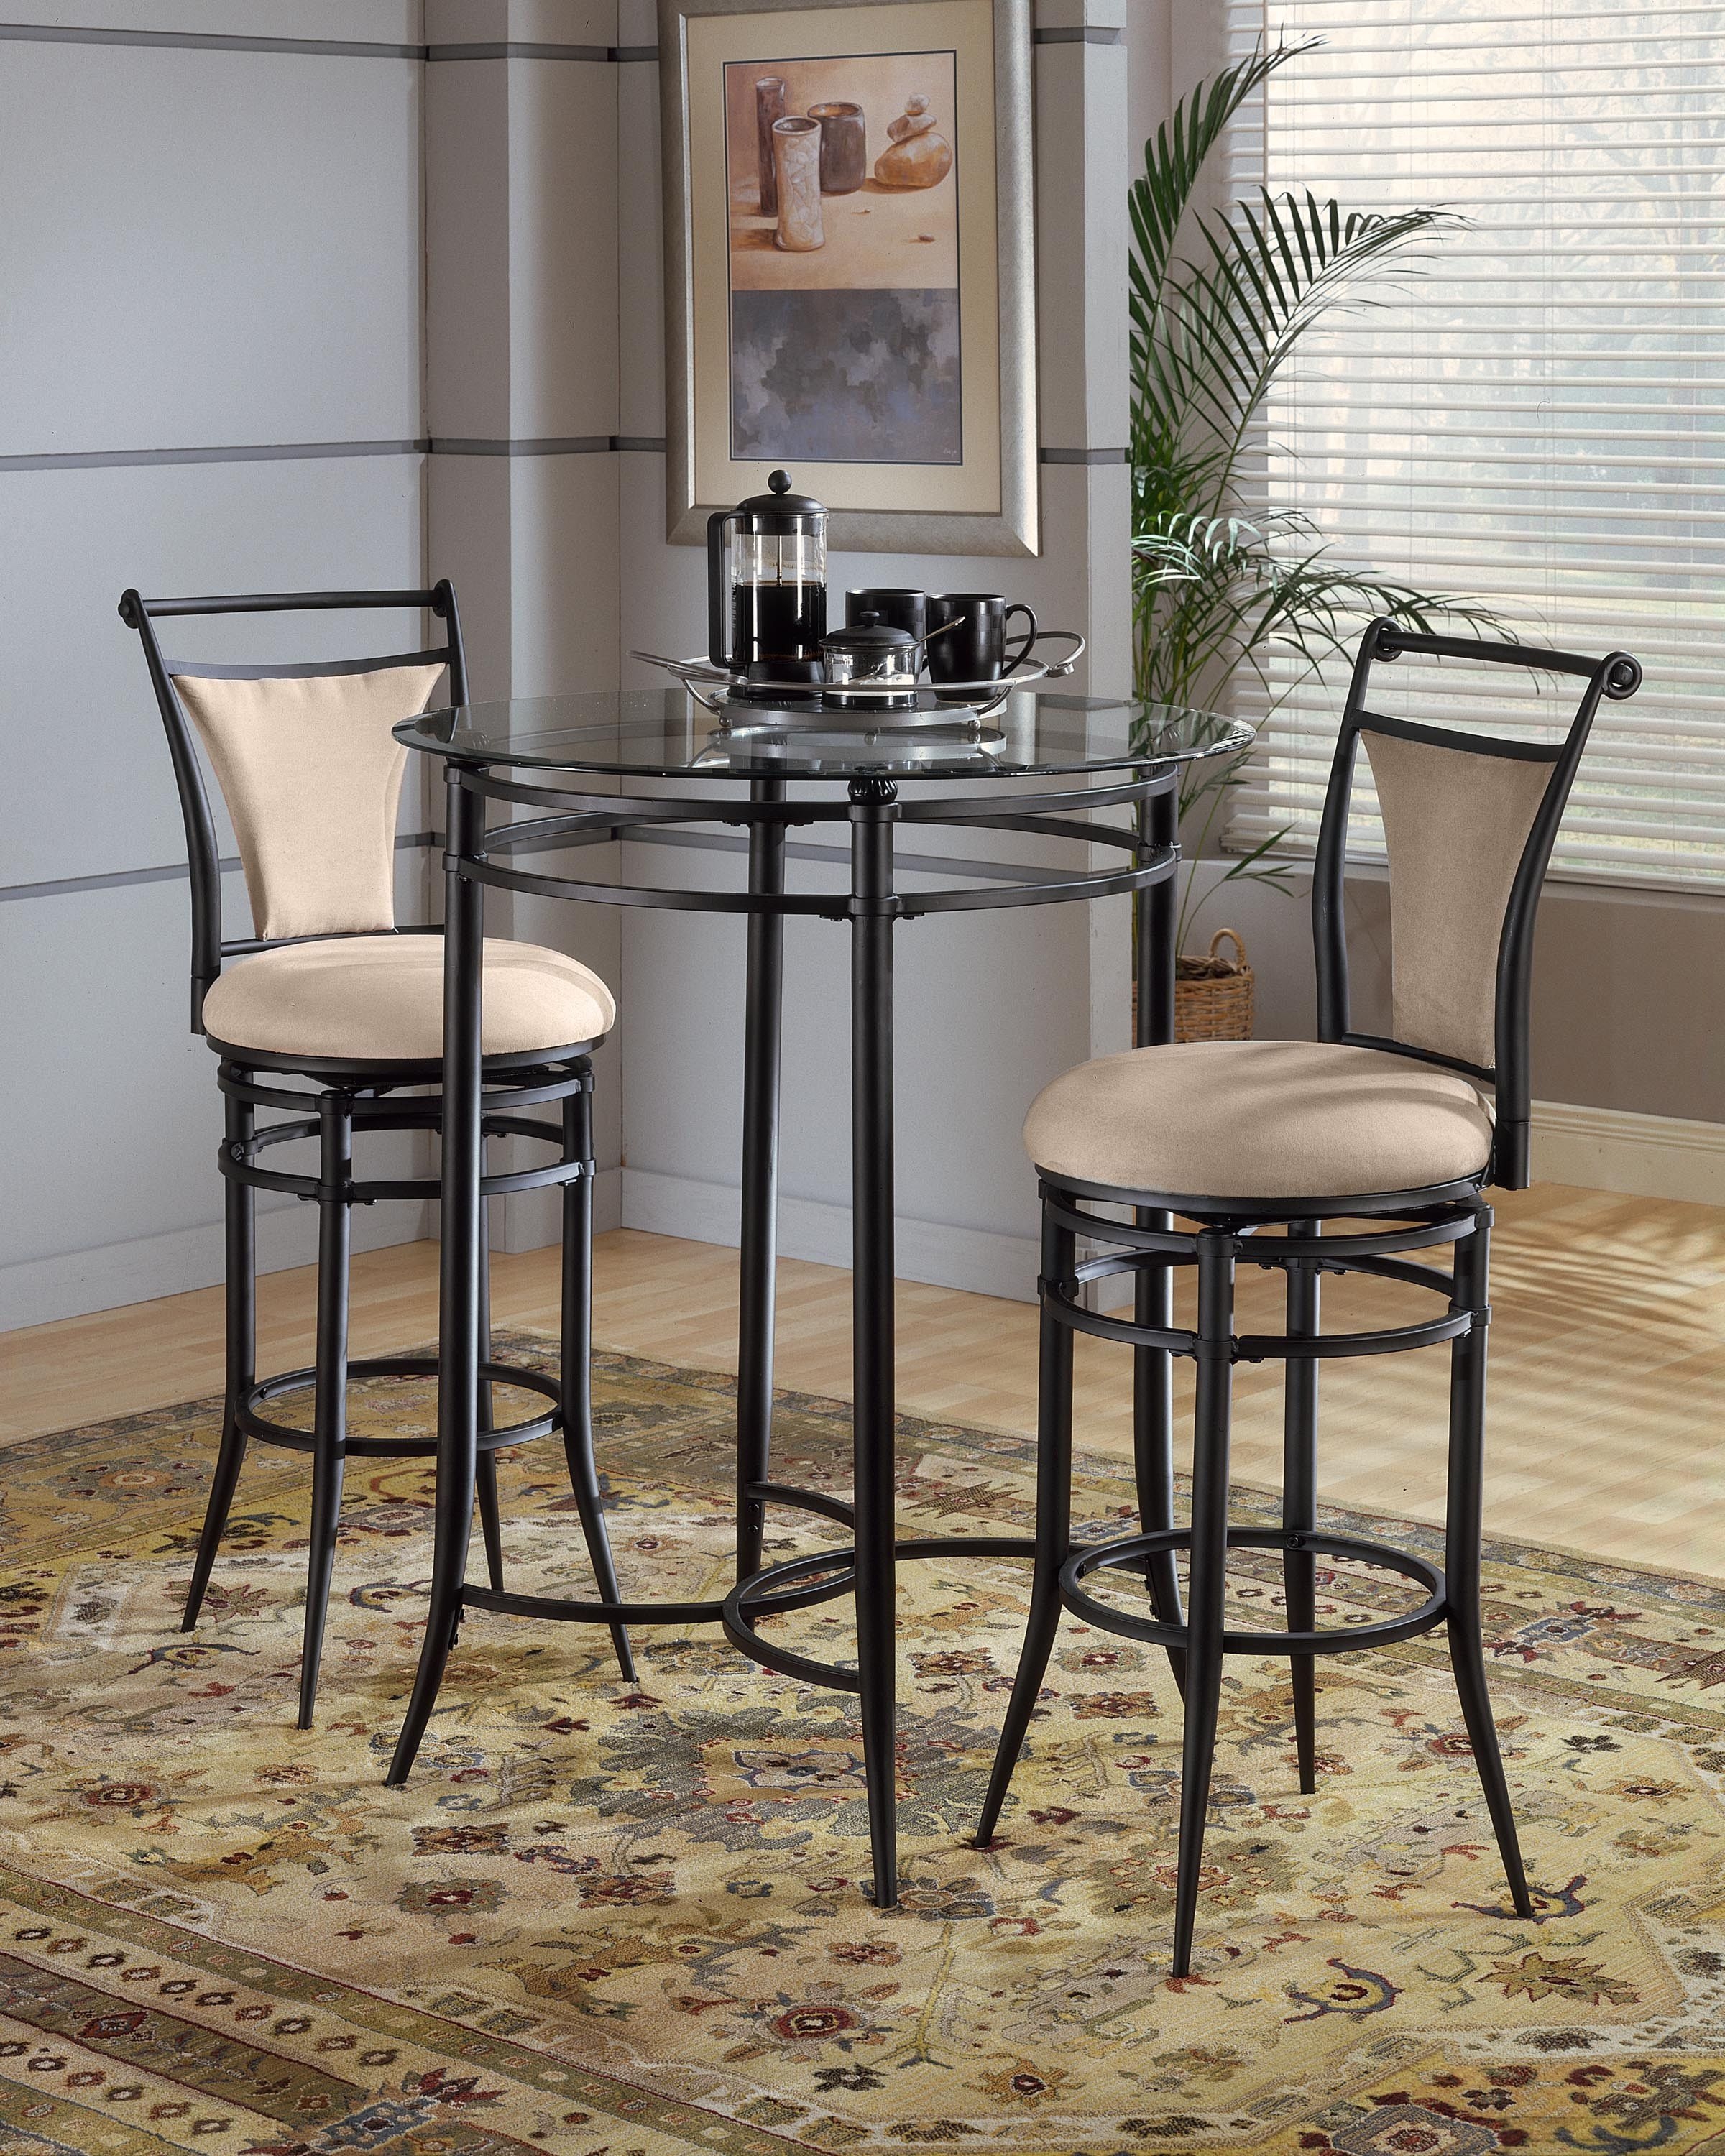 Tall bistro table and chairs